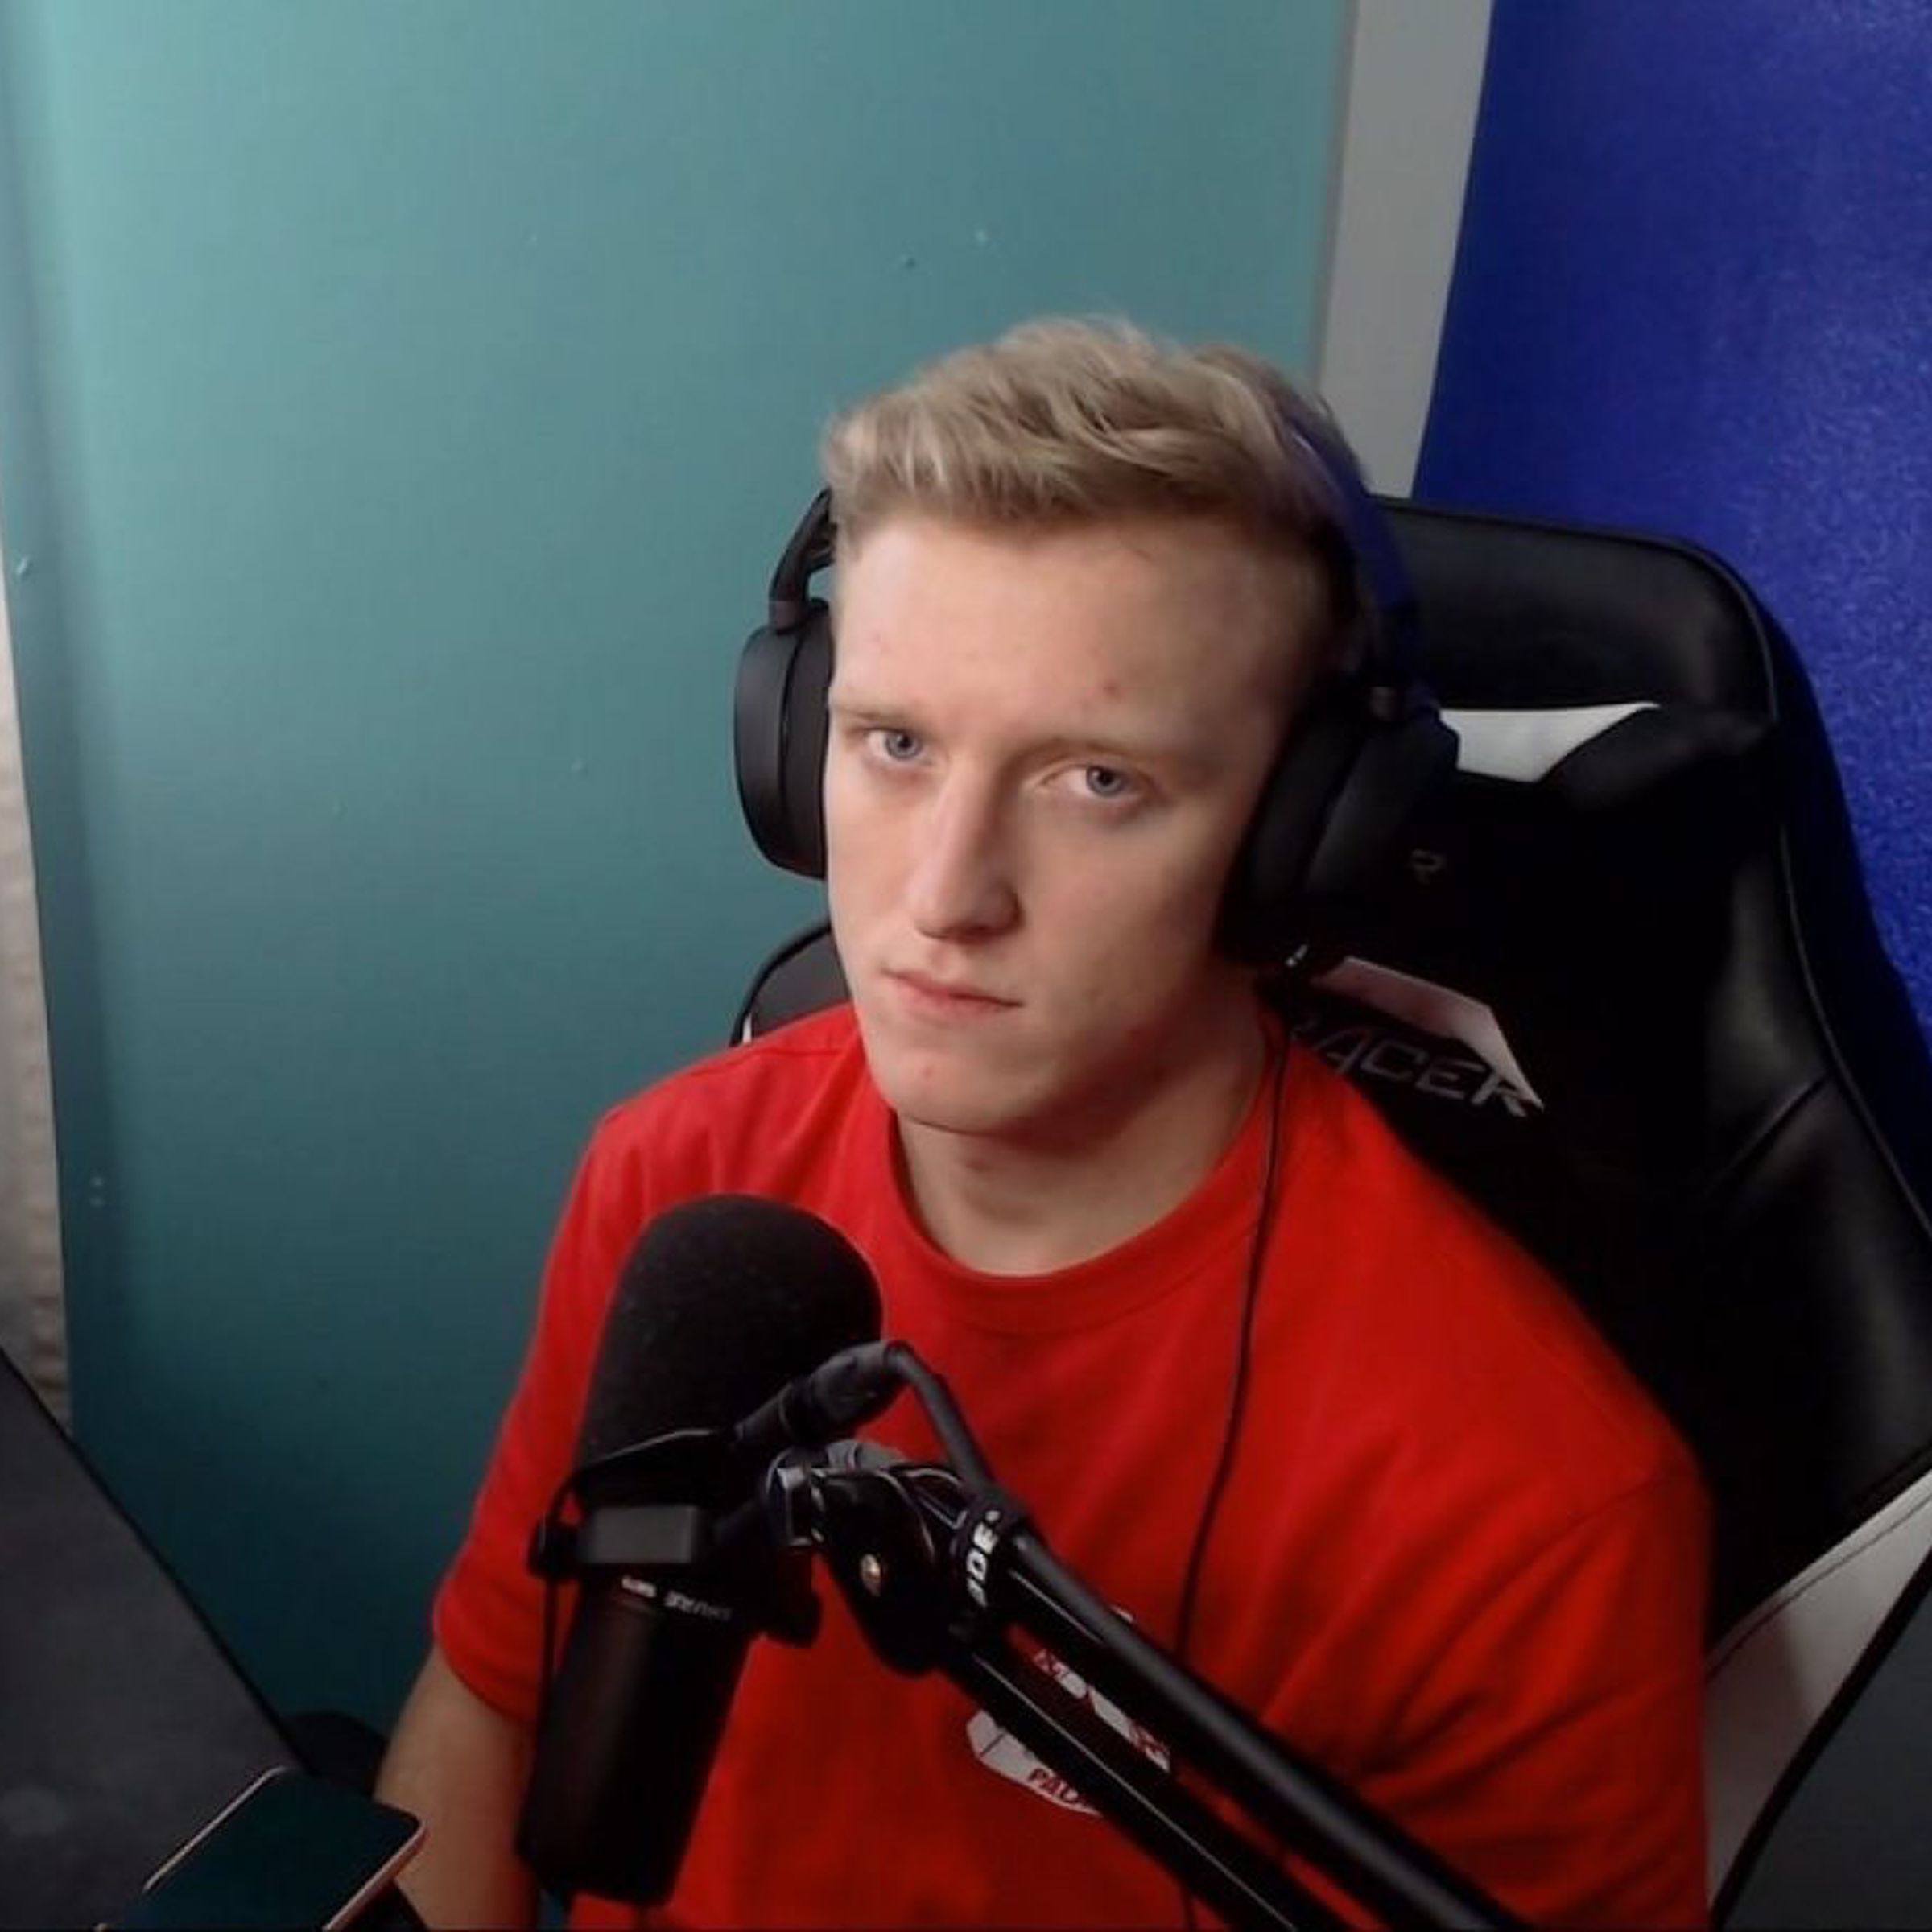 Turner “Tfue” Tenney during one of his streams.